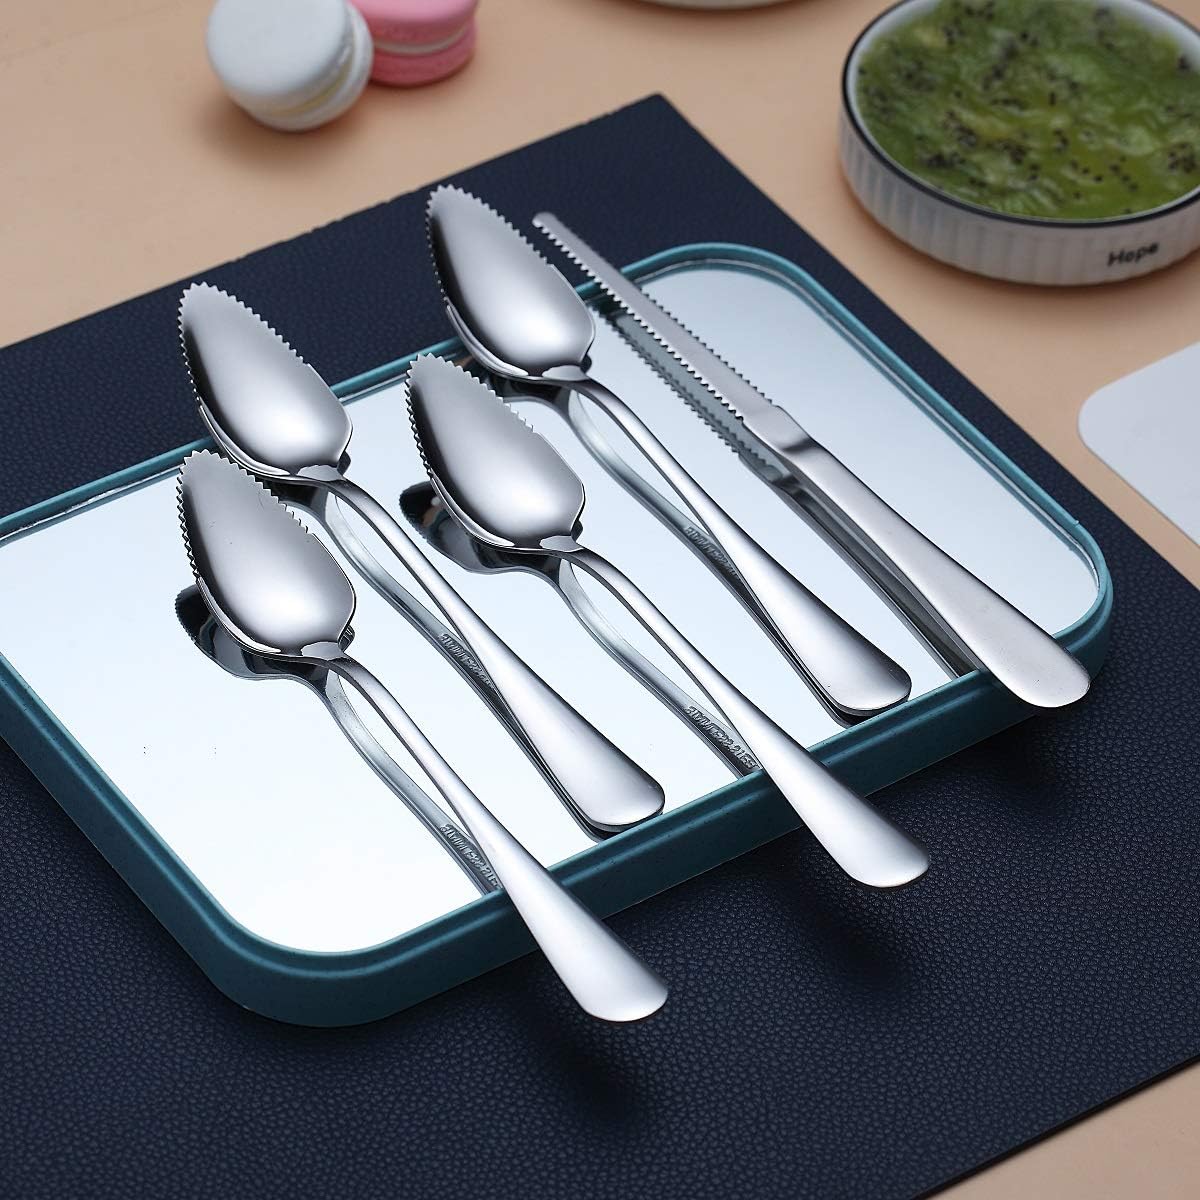 Grapefruit Spoons 5 Pieces Set, 4 Stainless Steel Grapefruit Spoon And 1 Grapefruit knife With Titanium Plating, Grapefruit Utensil Set, Serrated Edges Spoon pack of 5 (Silver)